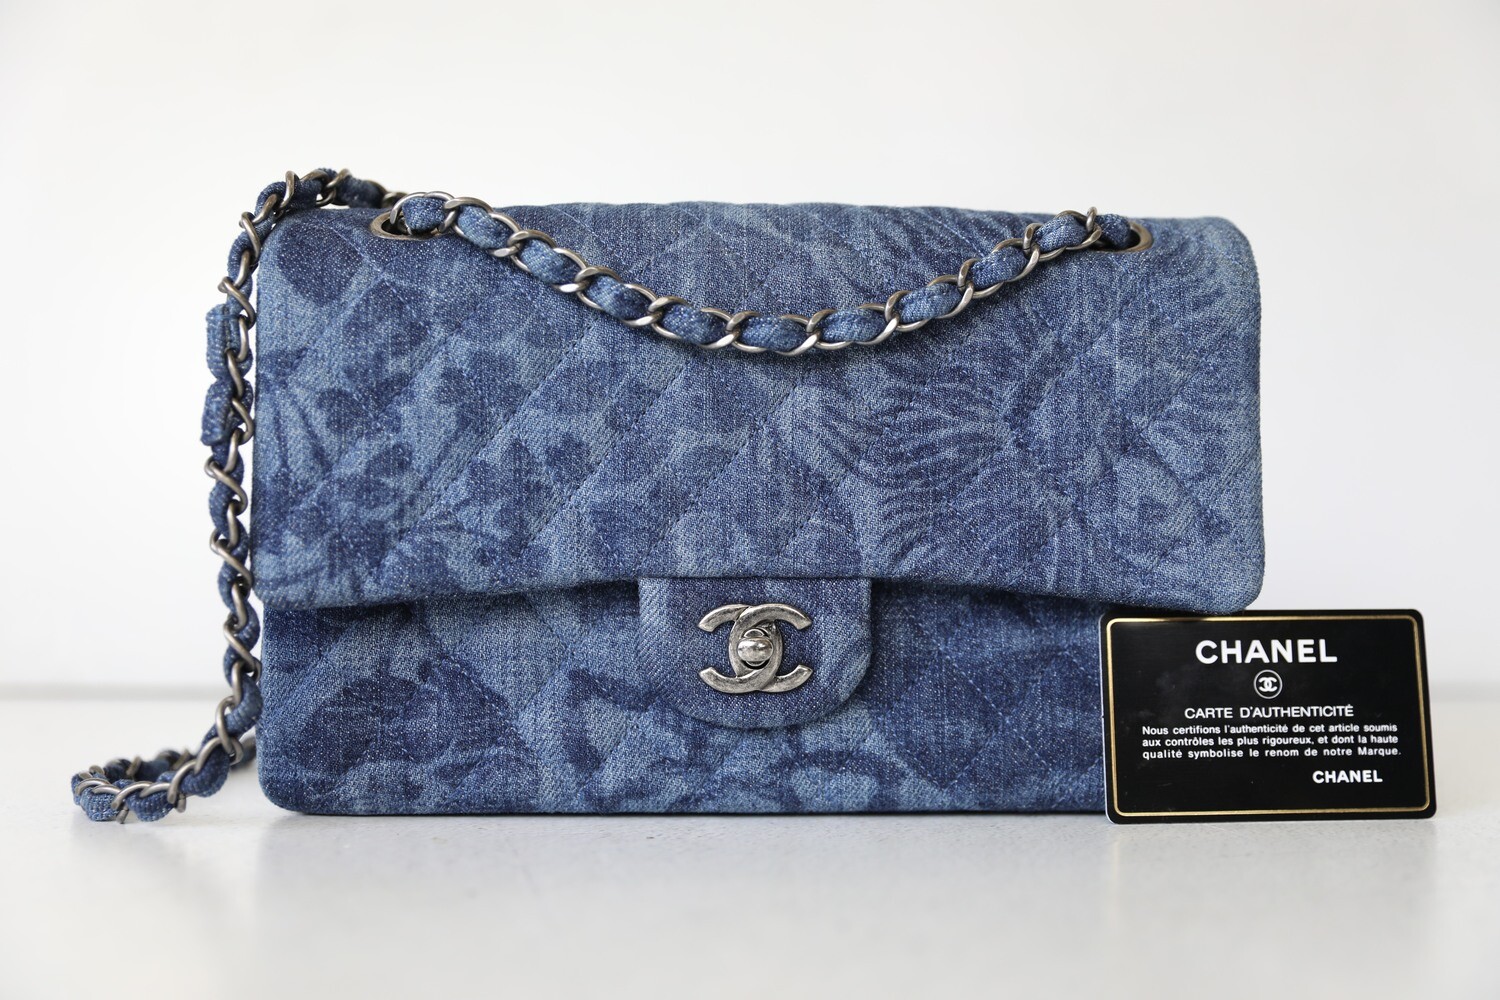 Chanel Flap, Denim Floral Print with Ruthenium Hardware, Preowned